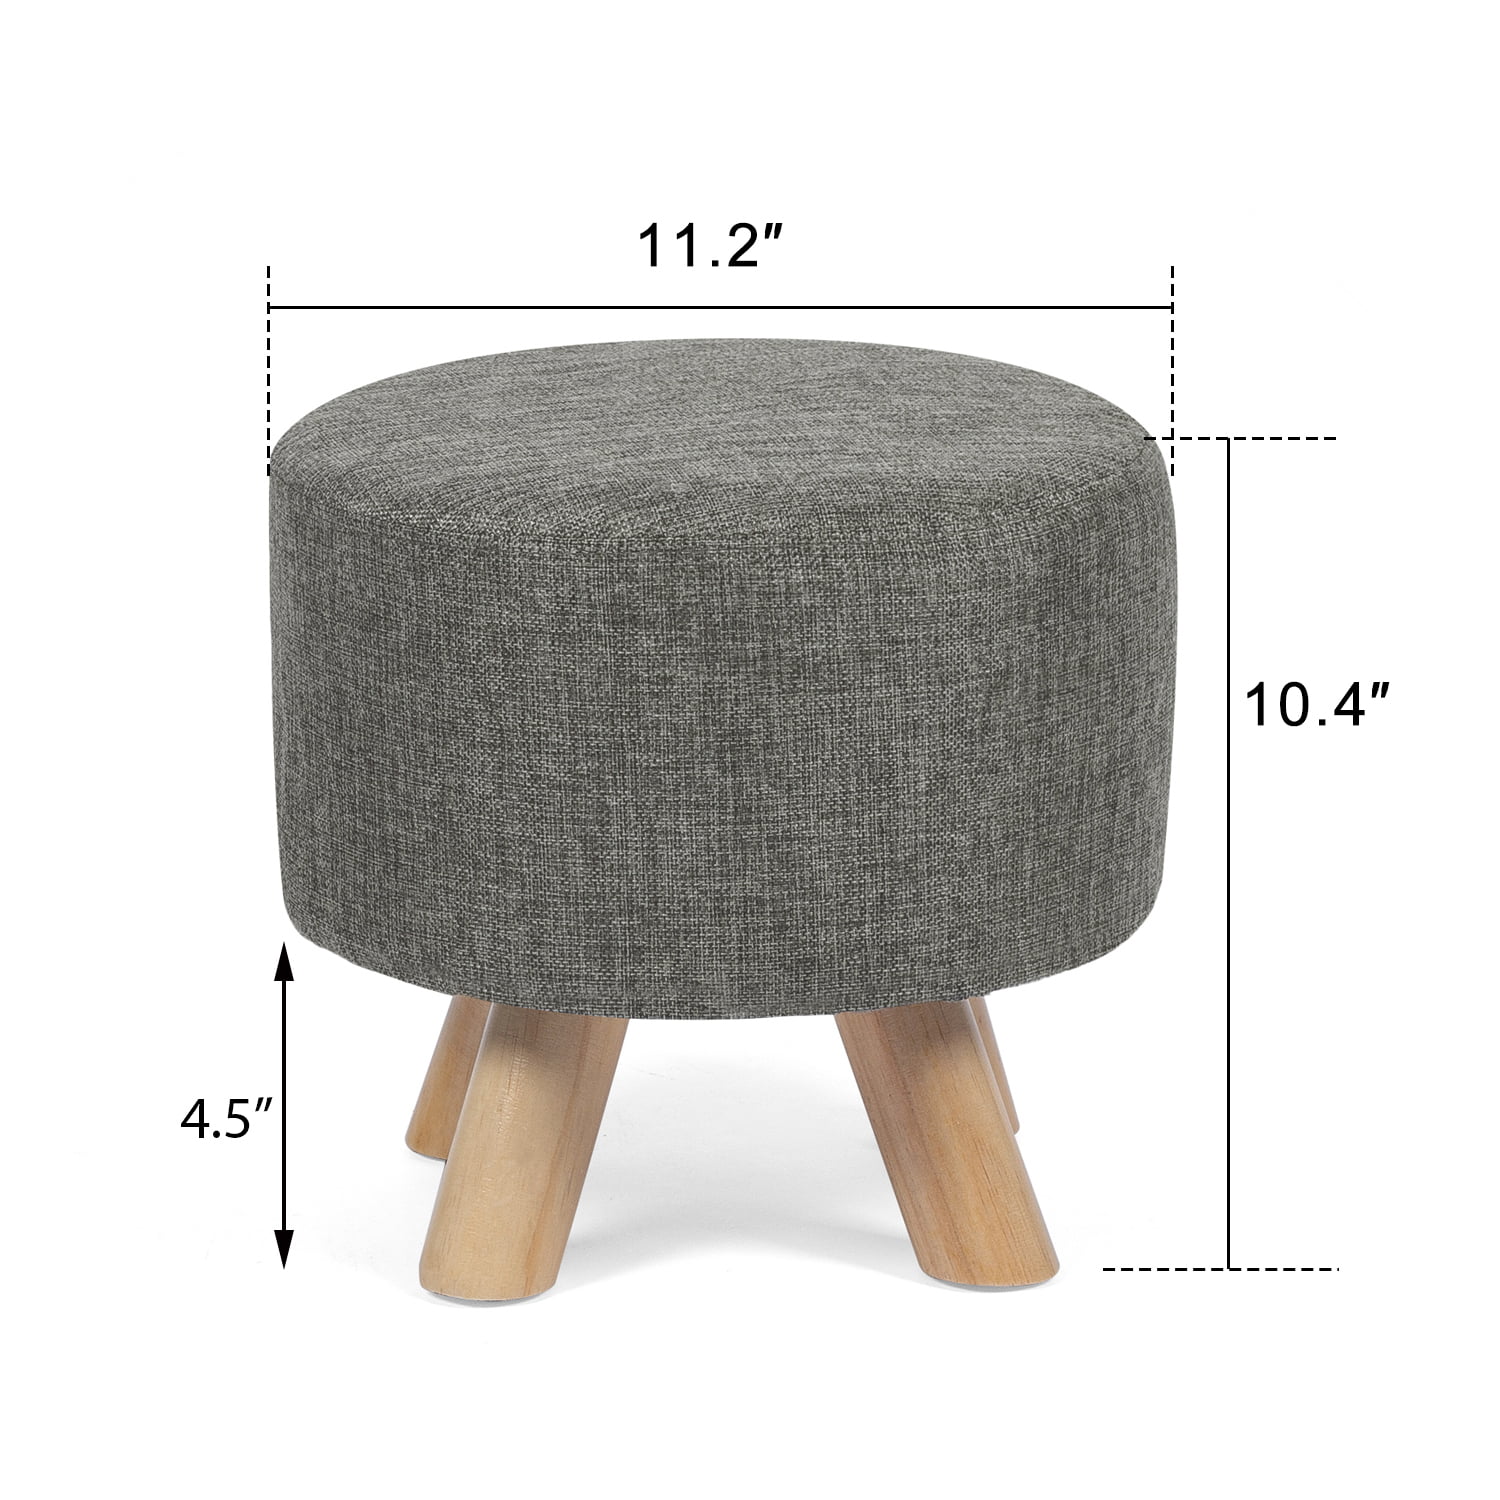  Foot Stool with Handle, Footstool Elegant Small Foot Stool Rest  with Wooden Legs, 9''H, Rectangle Fabric Foot Stools for Adults with  Waterfall Edge, Ottoman for Living Room, Desk, Bedroom, Deep Blue 